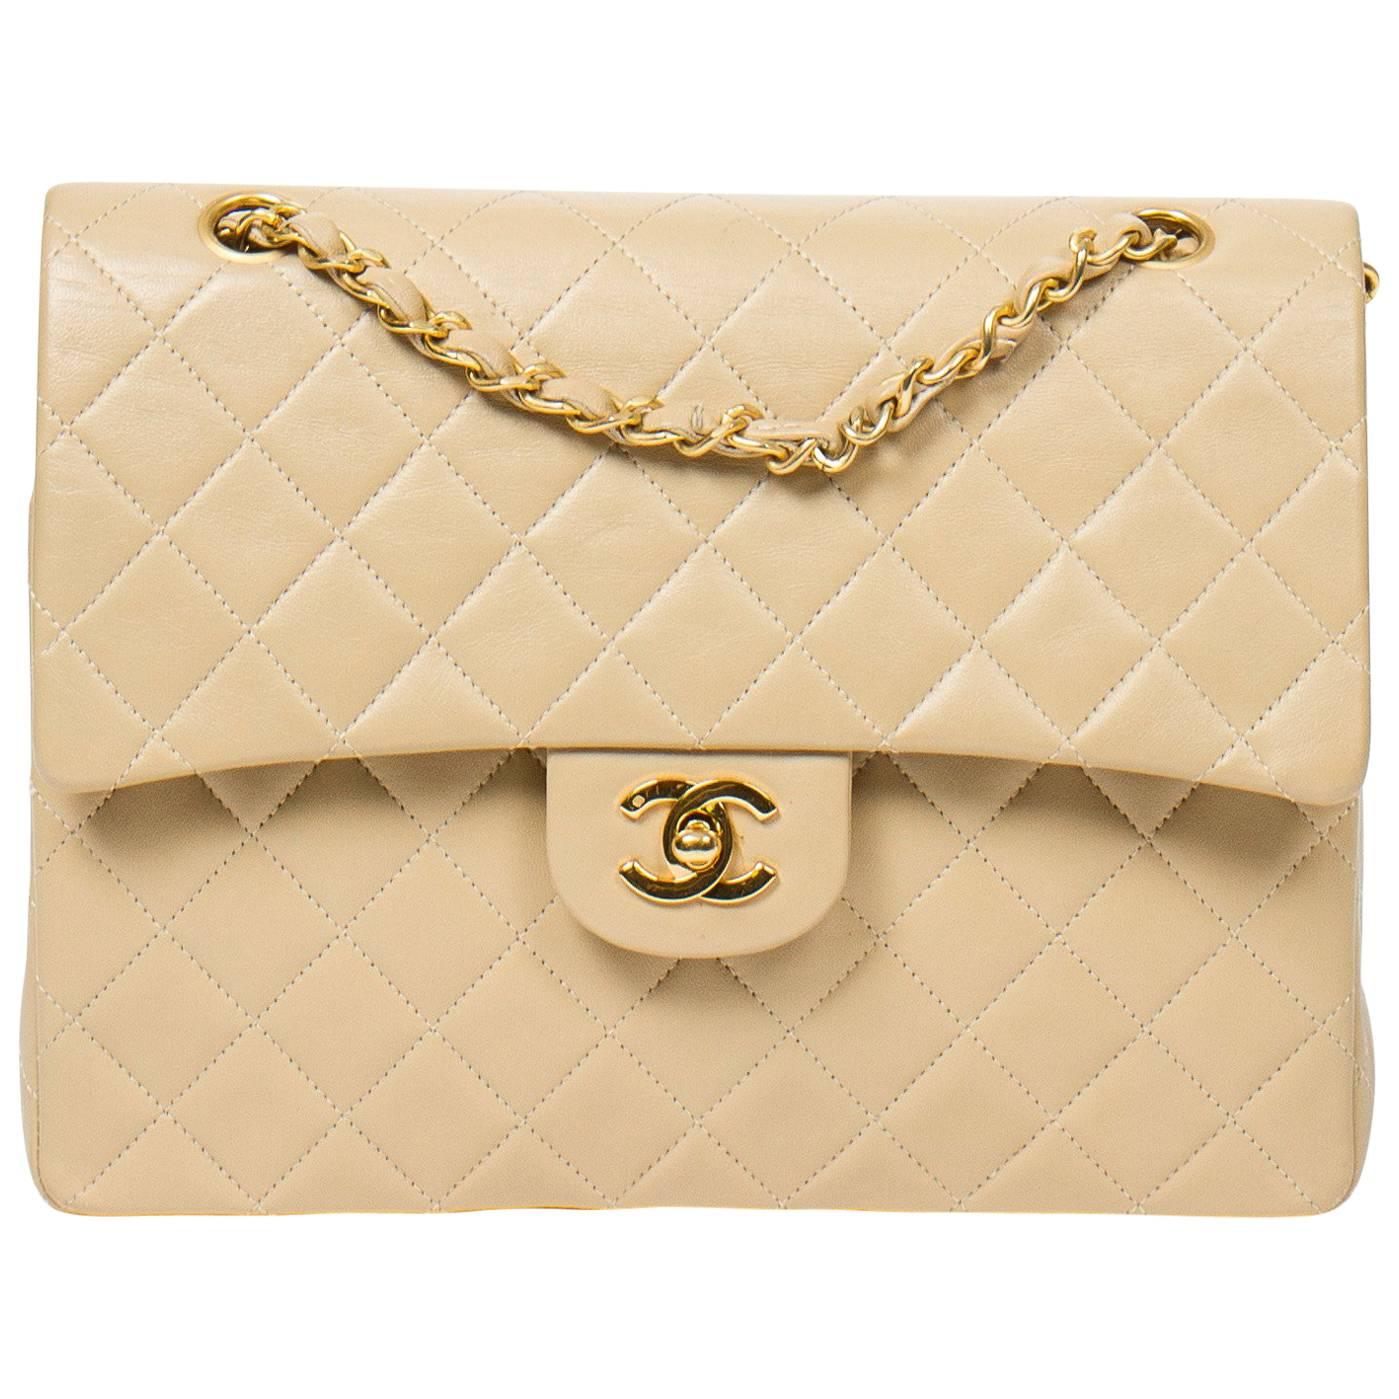 Chanel Tall Double Flap Beige Leather 